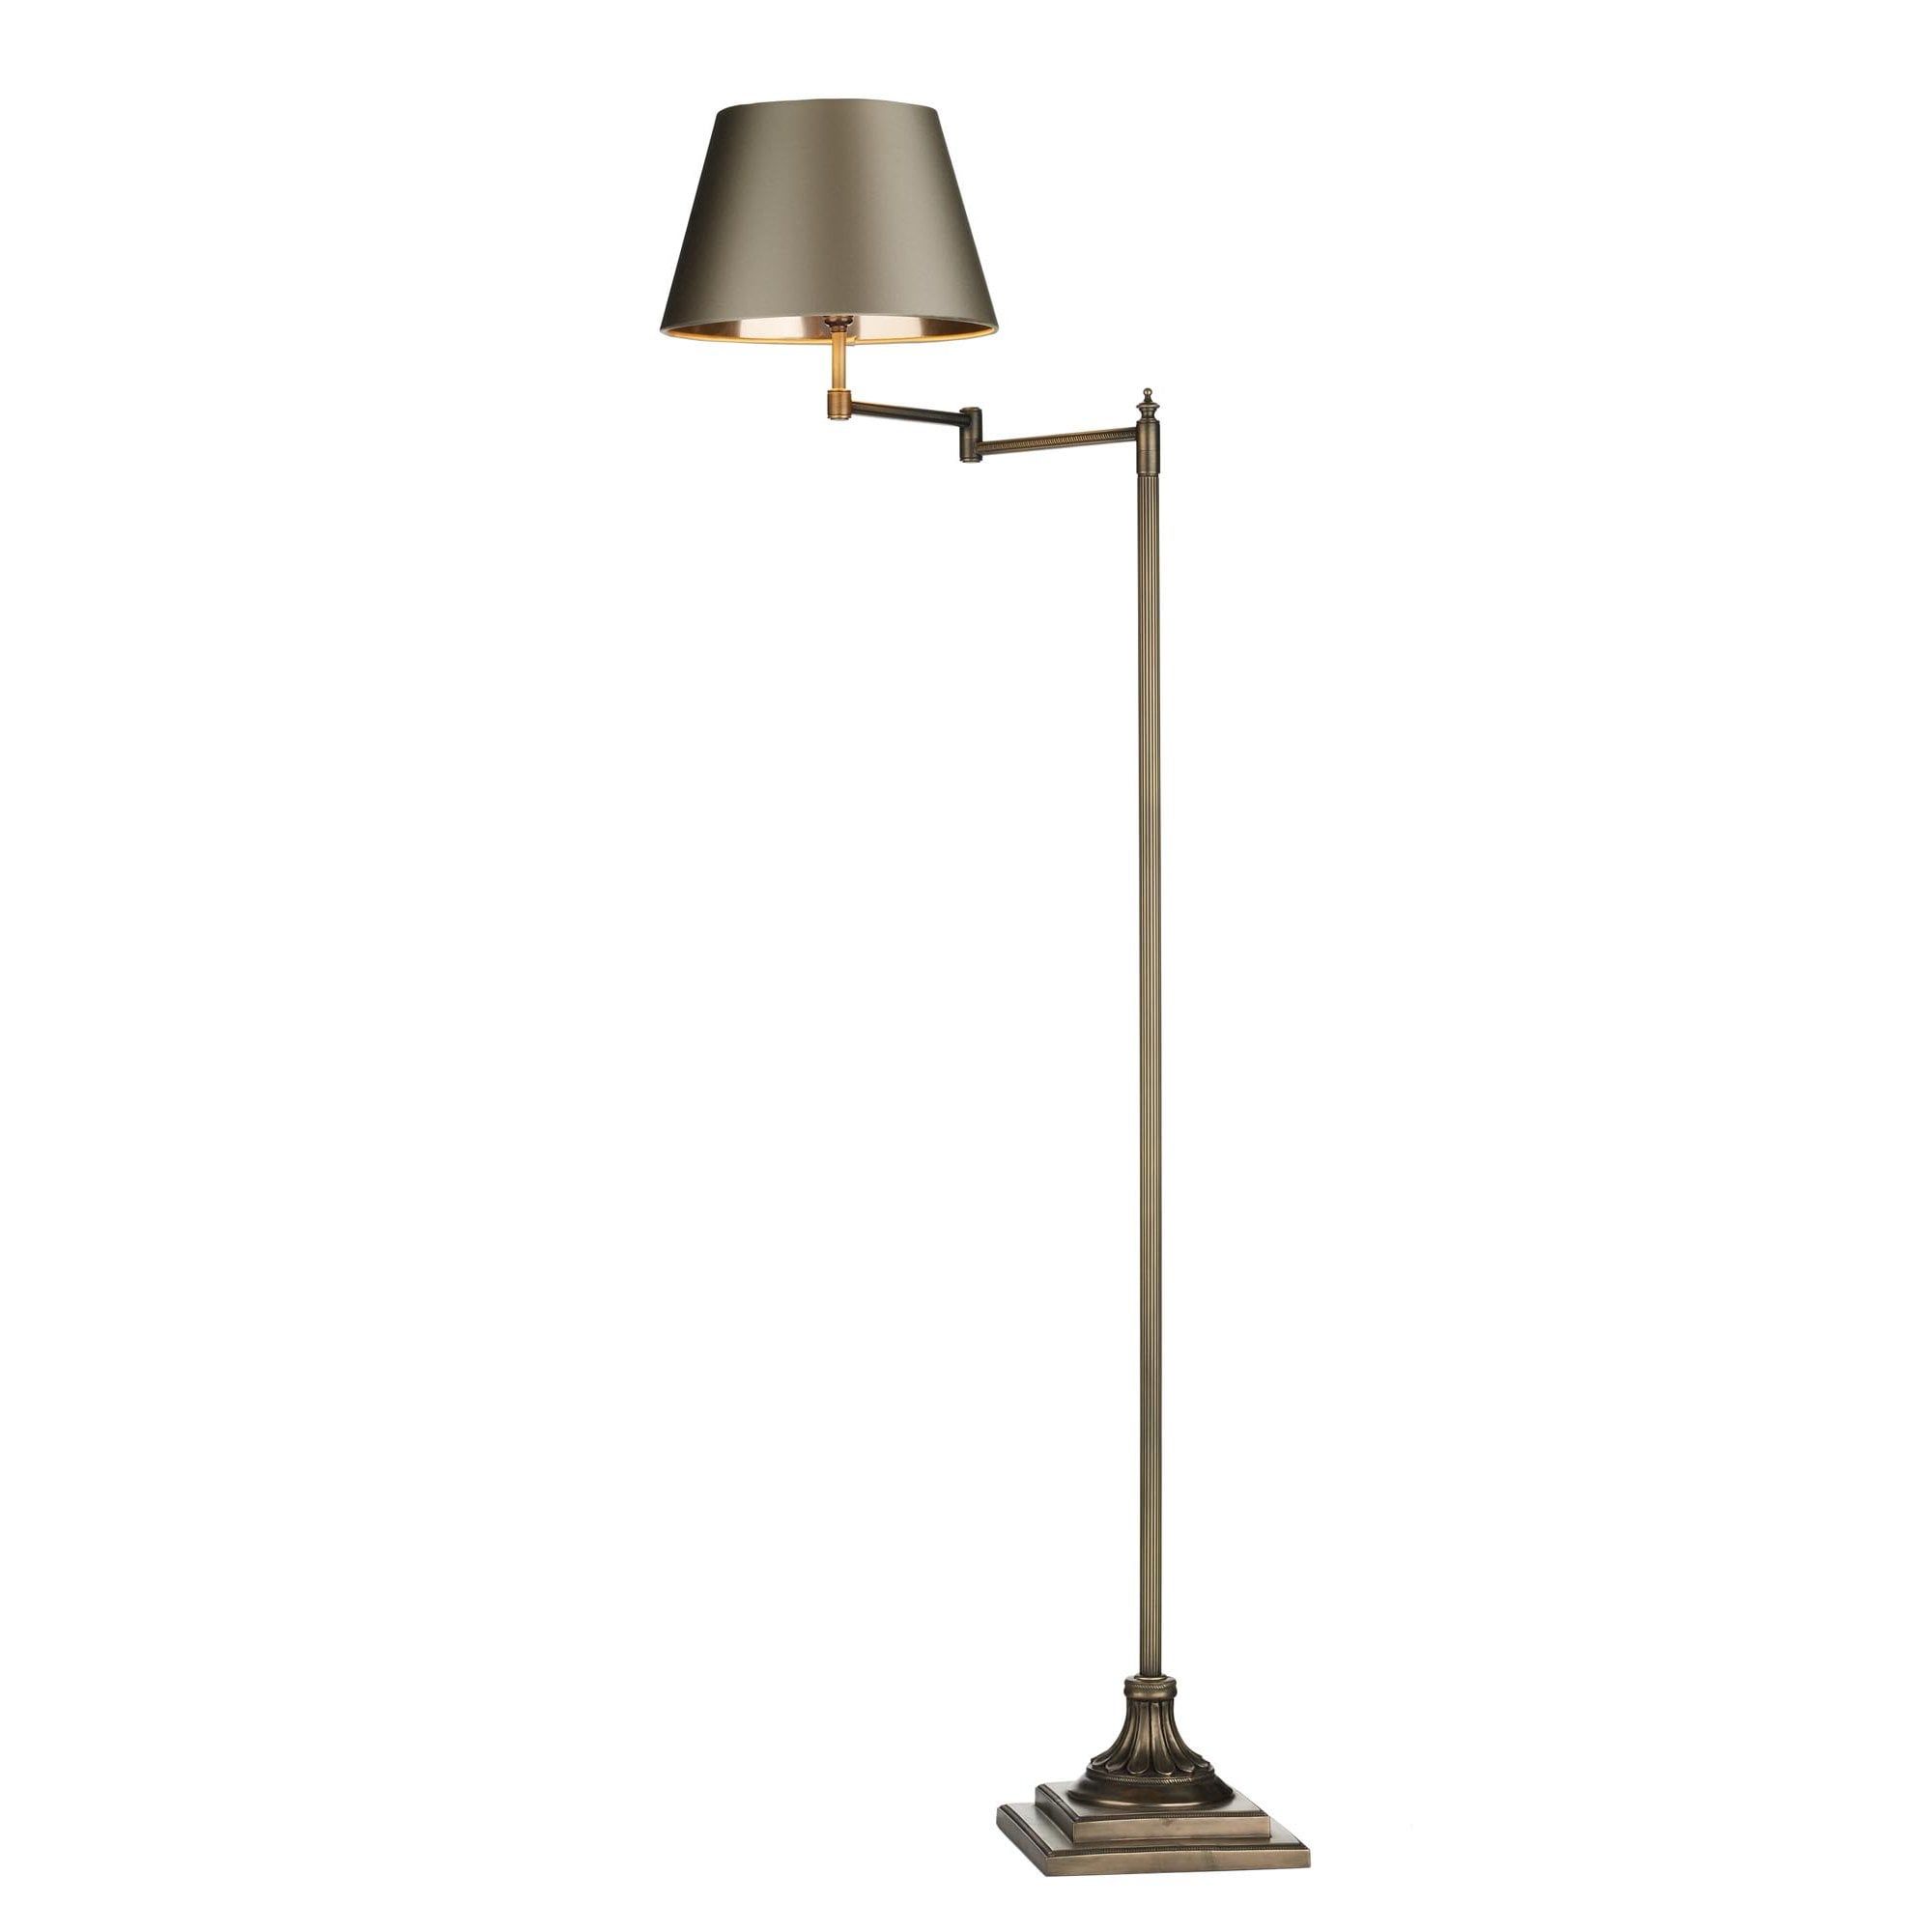 Floor Lamp Antique Brass With Swivel Arm Right Lighting And Lights Uk With Antique Brass Floor Lamps (View 13 of 20)